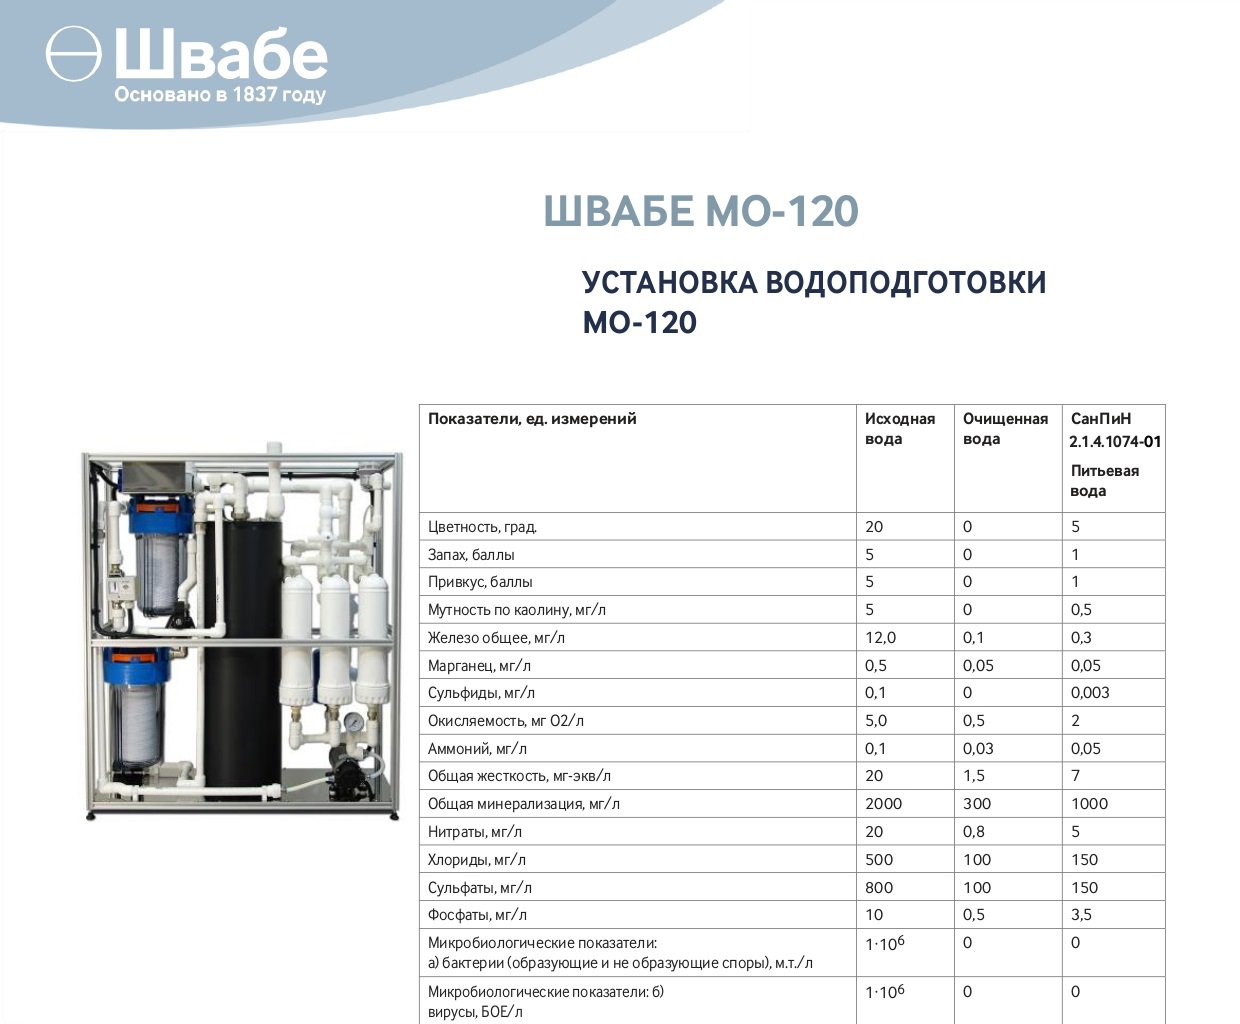 Water treatment system MO-120